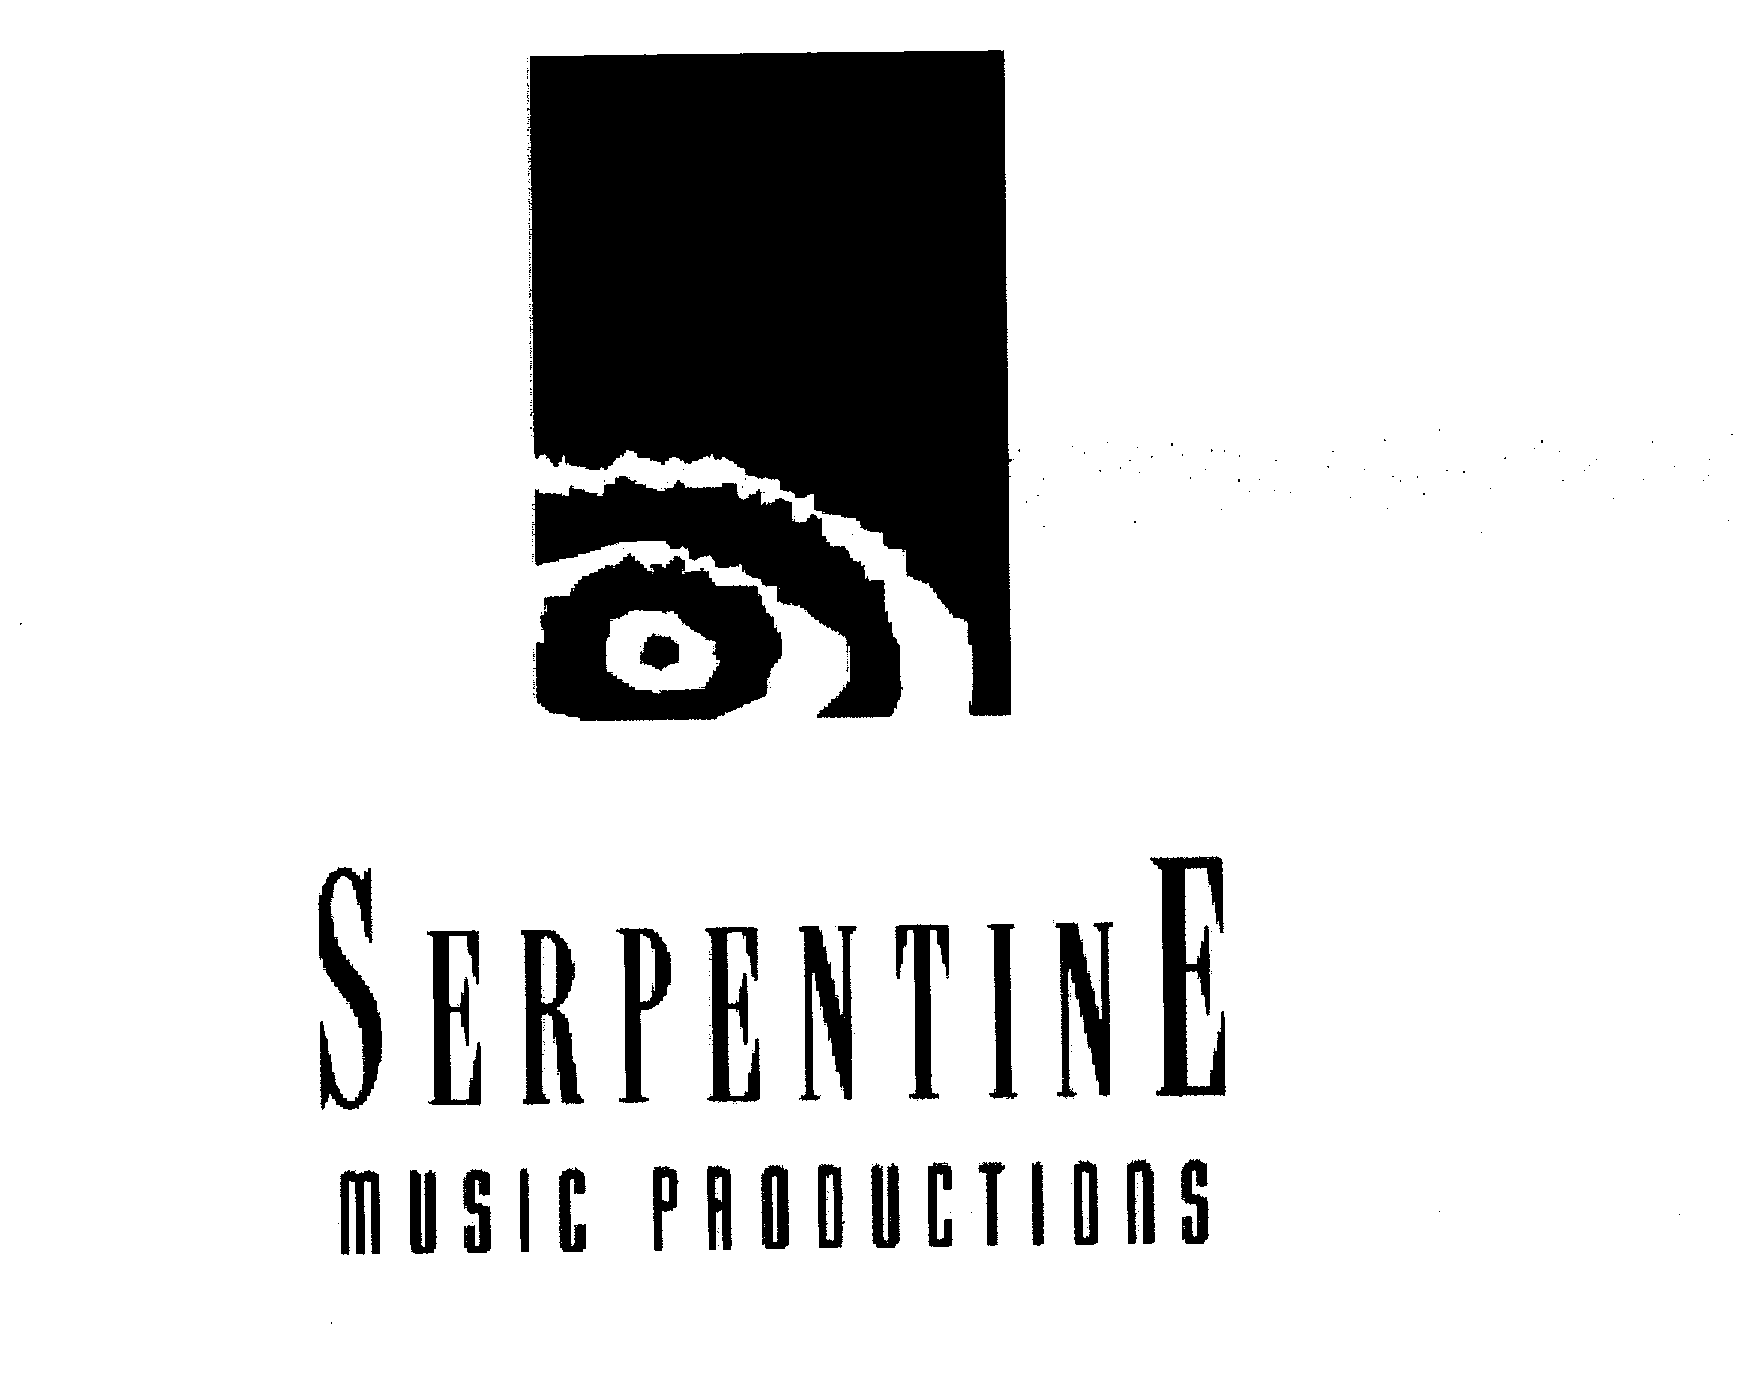  SERPENTINE MUSIC PRODUCTIONS